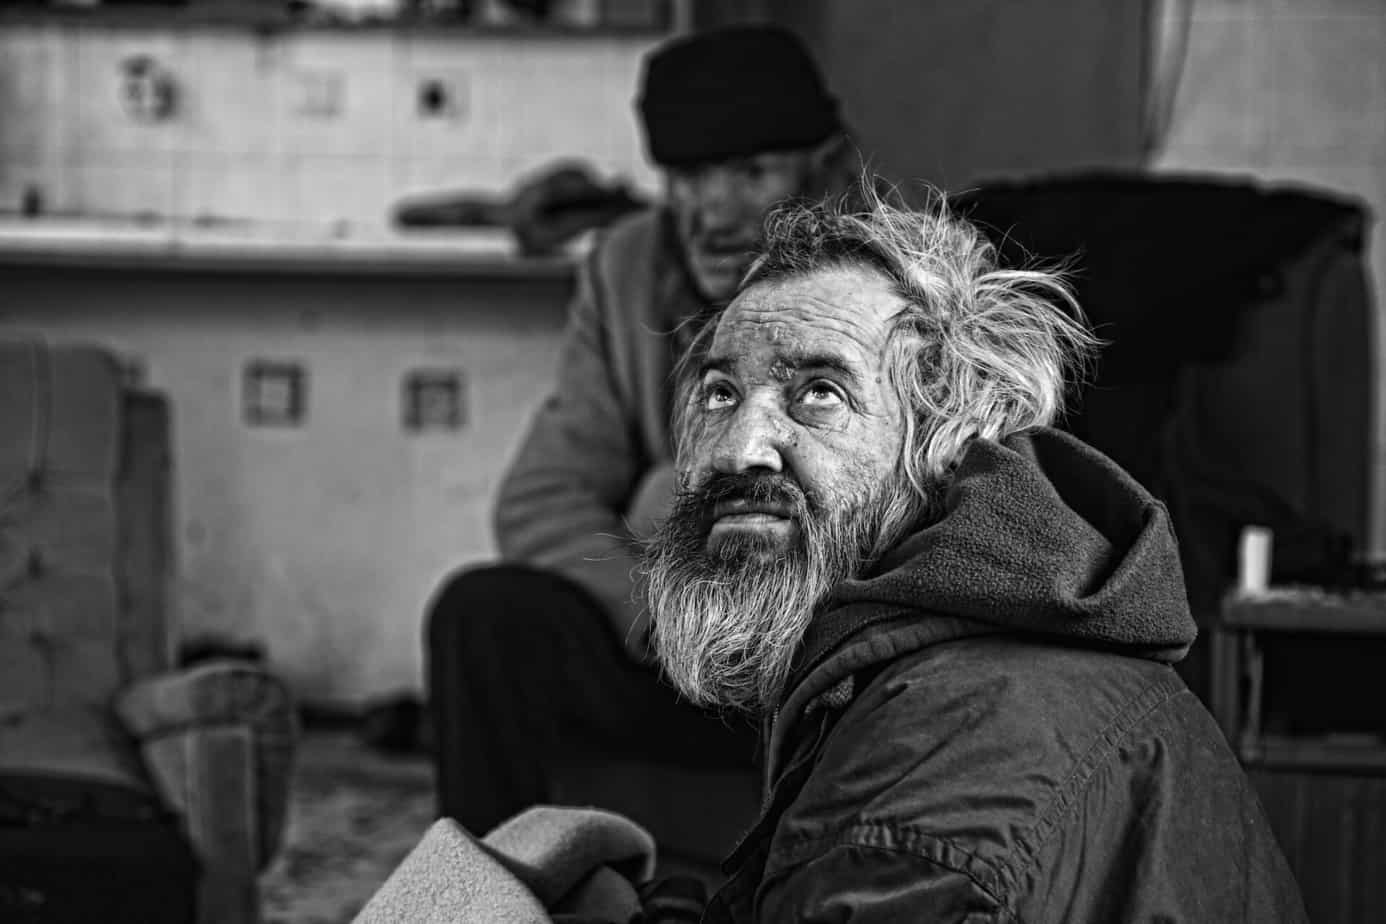 Poor homeless man sitting in abandoned house